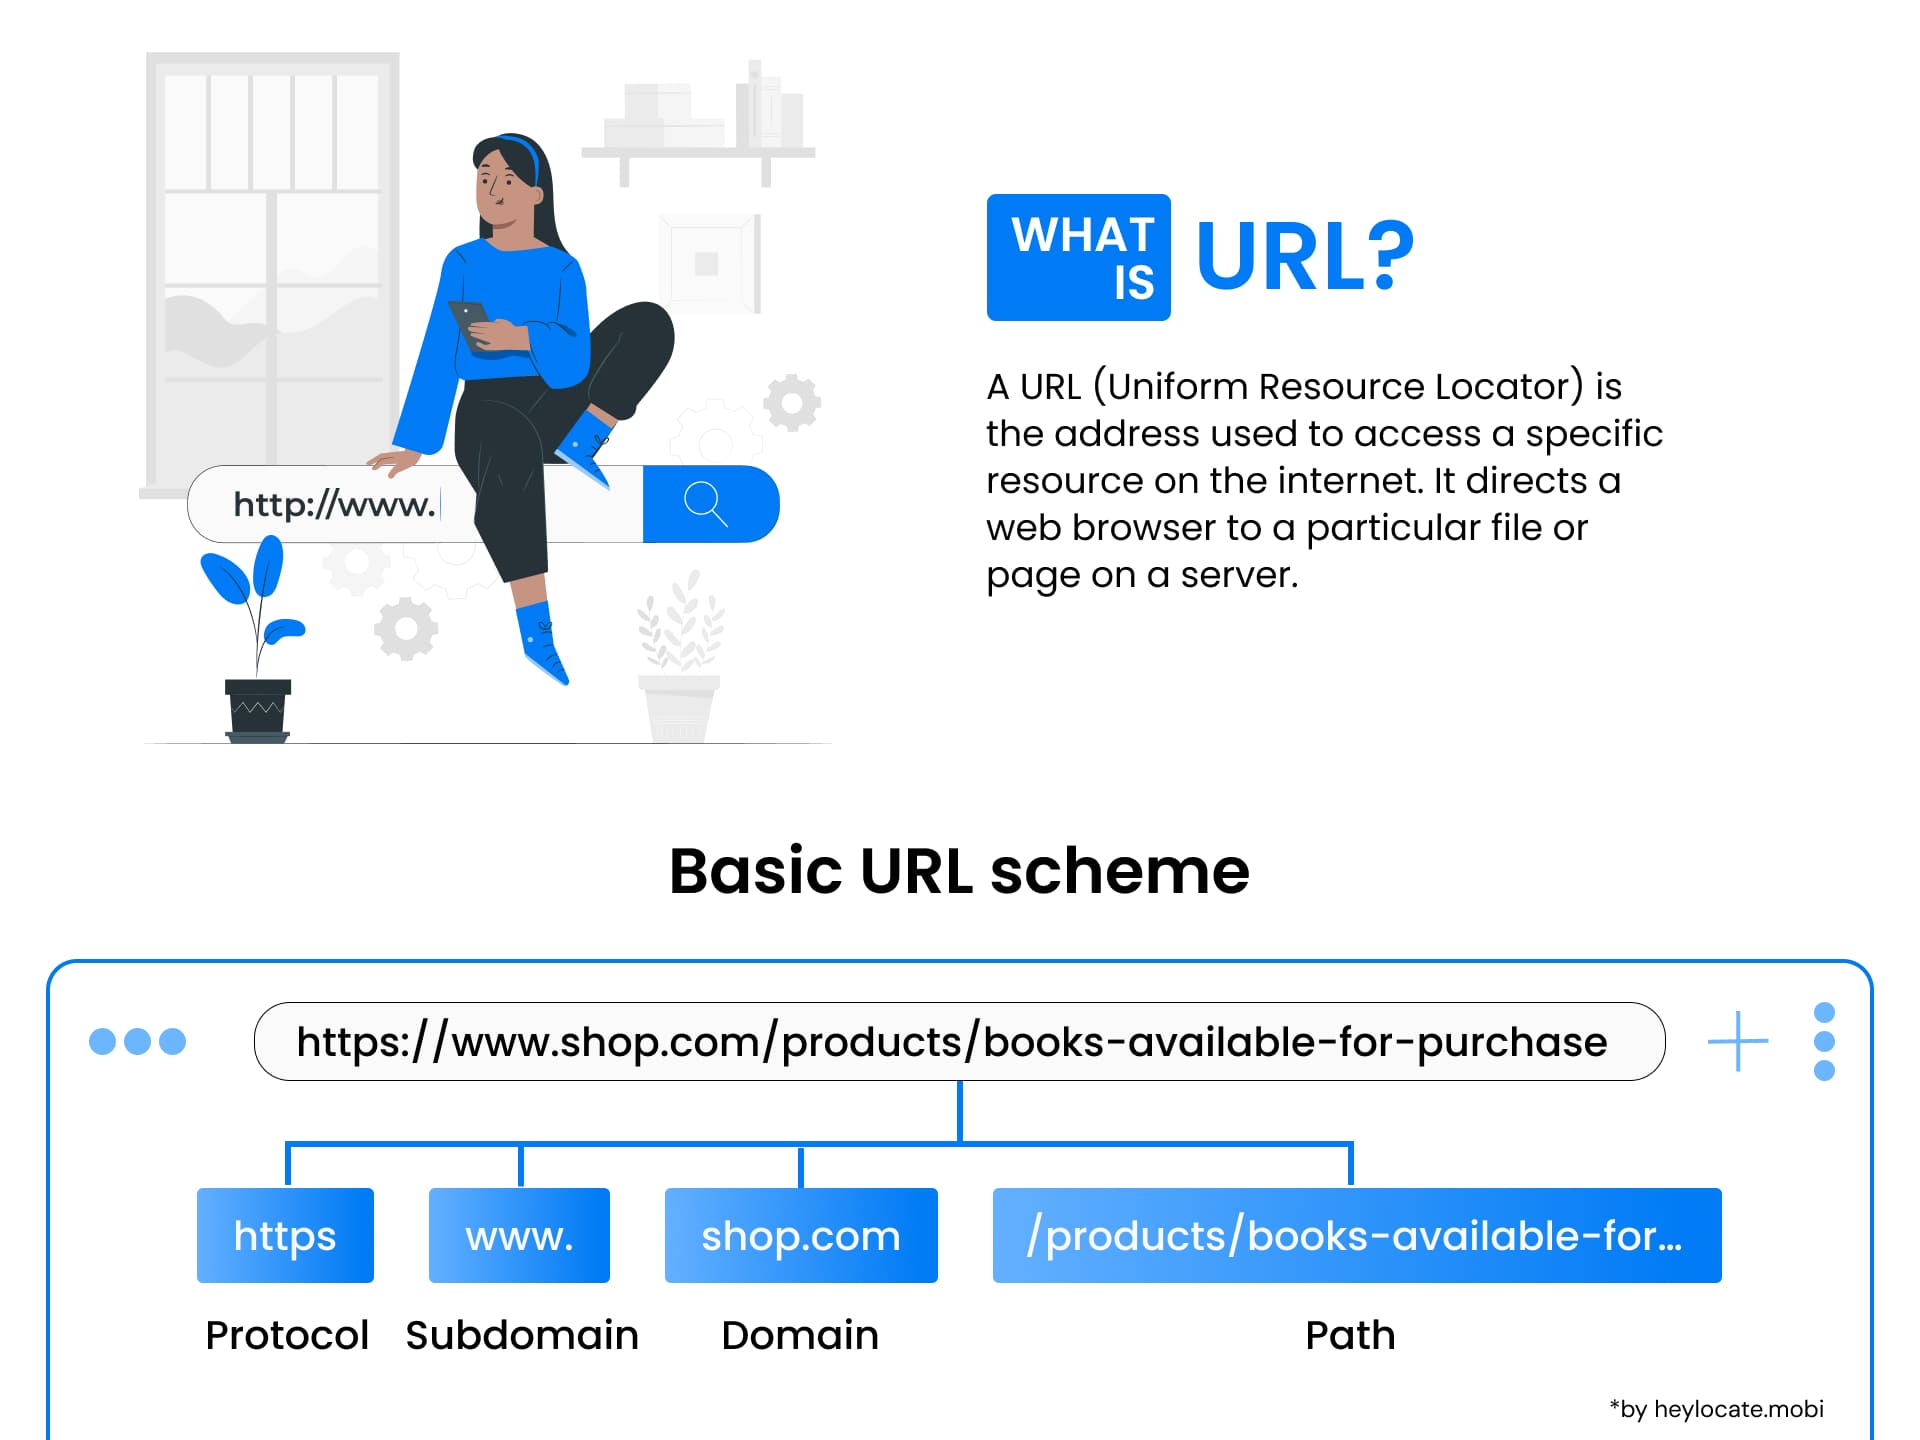 Educational illustration explaining the structure of a URL with labeled components such as protocol, subdomain, domain, and path